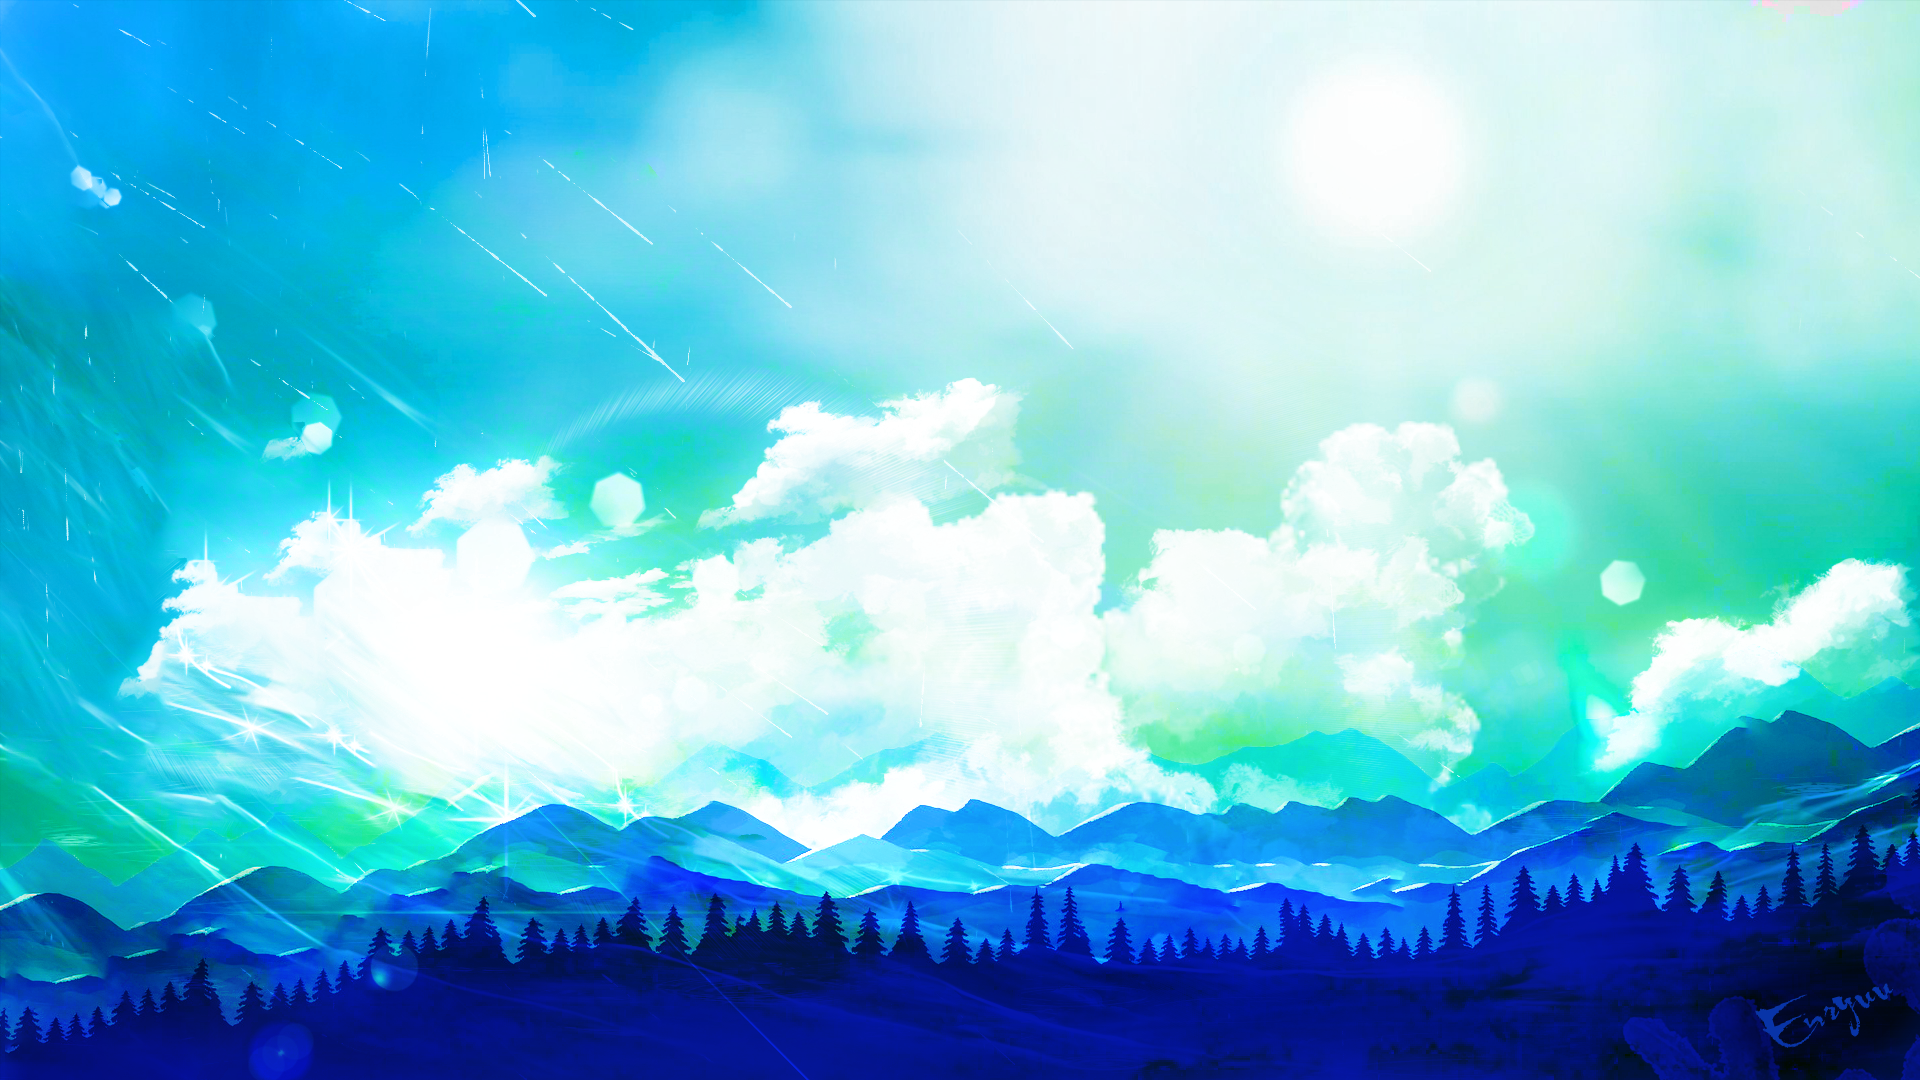 140+ Anime Landscape HD Wallpapers and Backgrounds